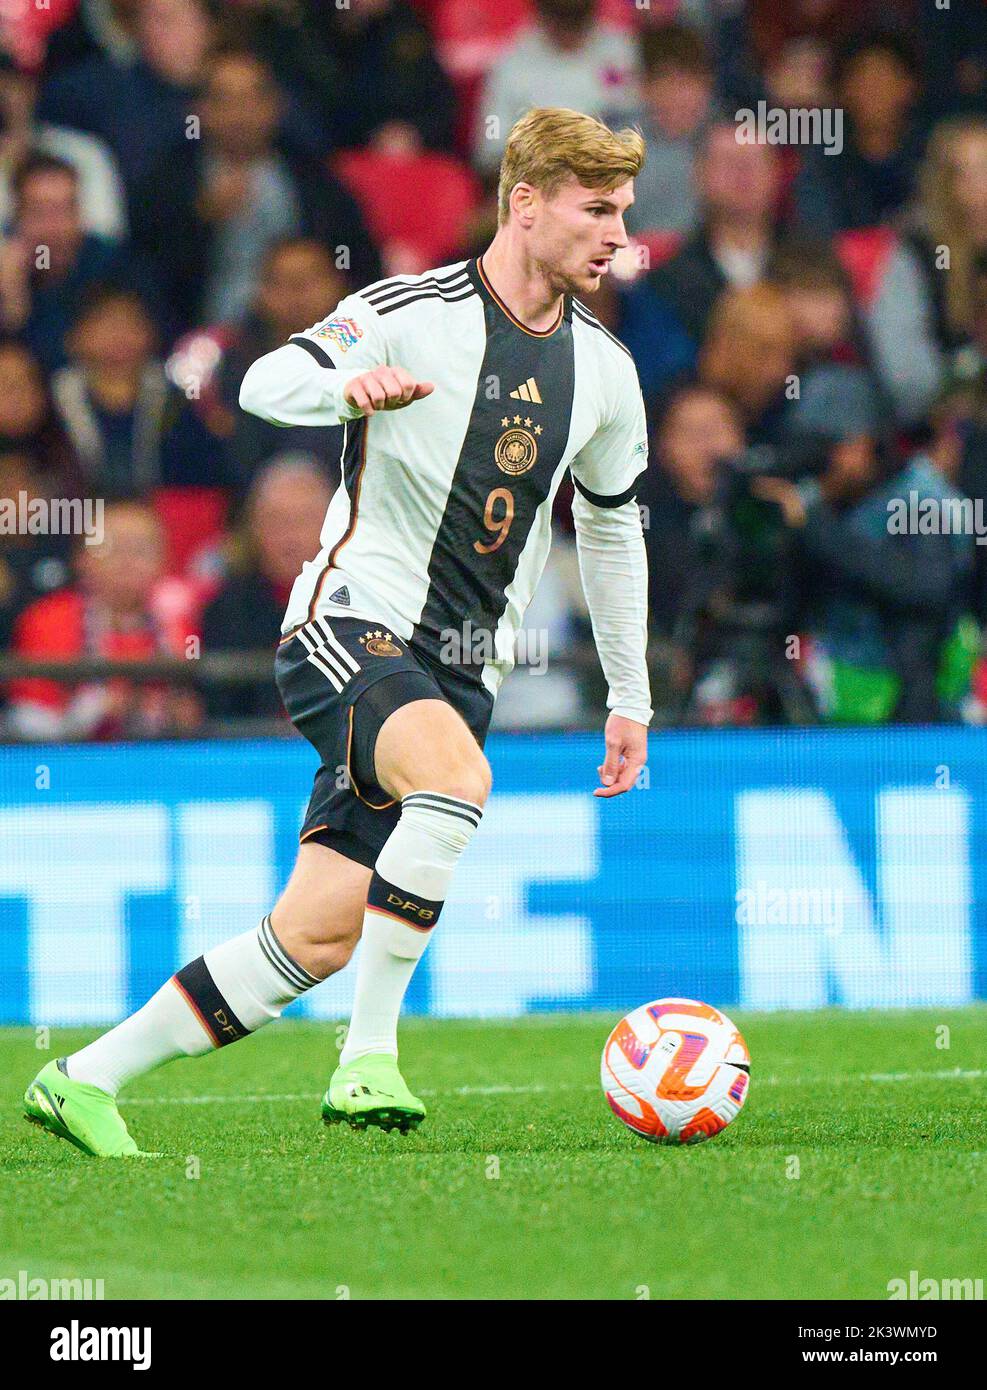 Timo Werner, DFB 9  in the UEFA Nations League 2022 match  ENGLAND - GERMANY 3-3  in Season 2022/2023 on Sept 26, 2022  in London, Great Britain.  © Peter Schatz / Alamy Live News Stock Photo